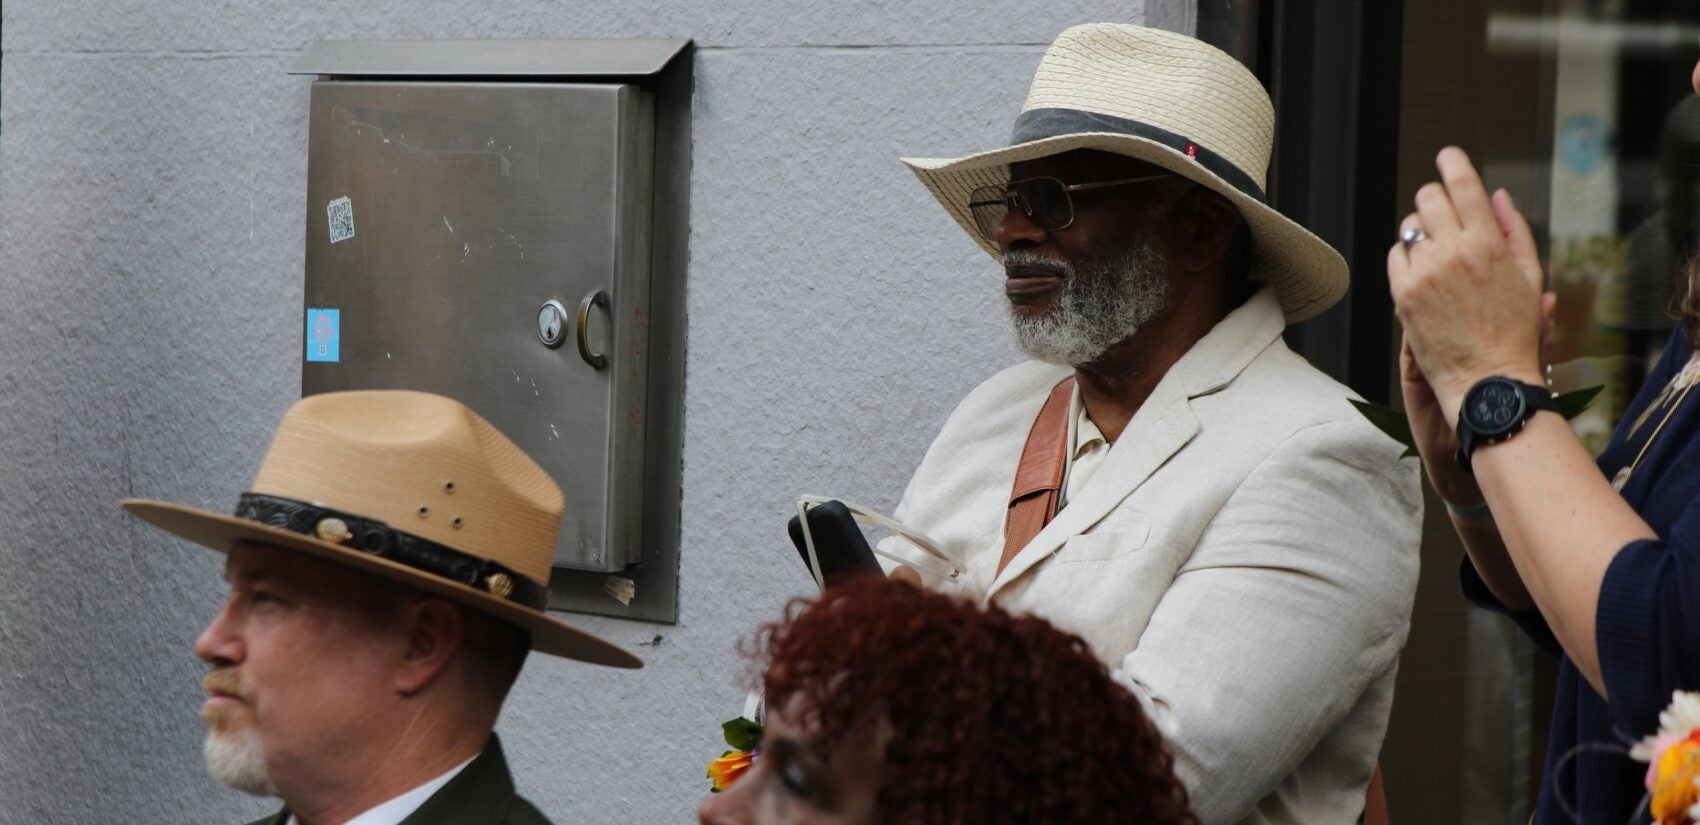 J. Calvin Jefferson Sr. is a descendent of three of the enslaved families at Monticello, and was able to attend Monday's unveiling of the Declaration House exhibit. (Cory Sharber/WHYY)